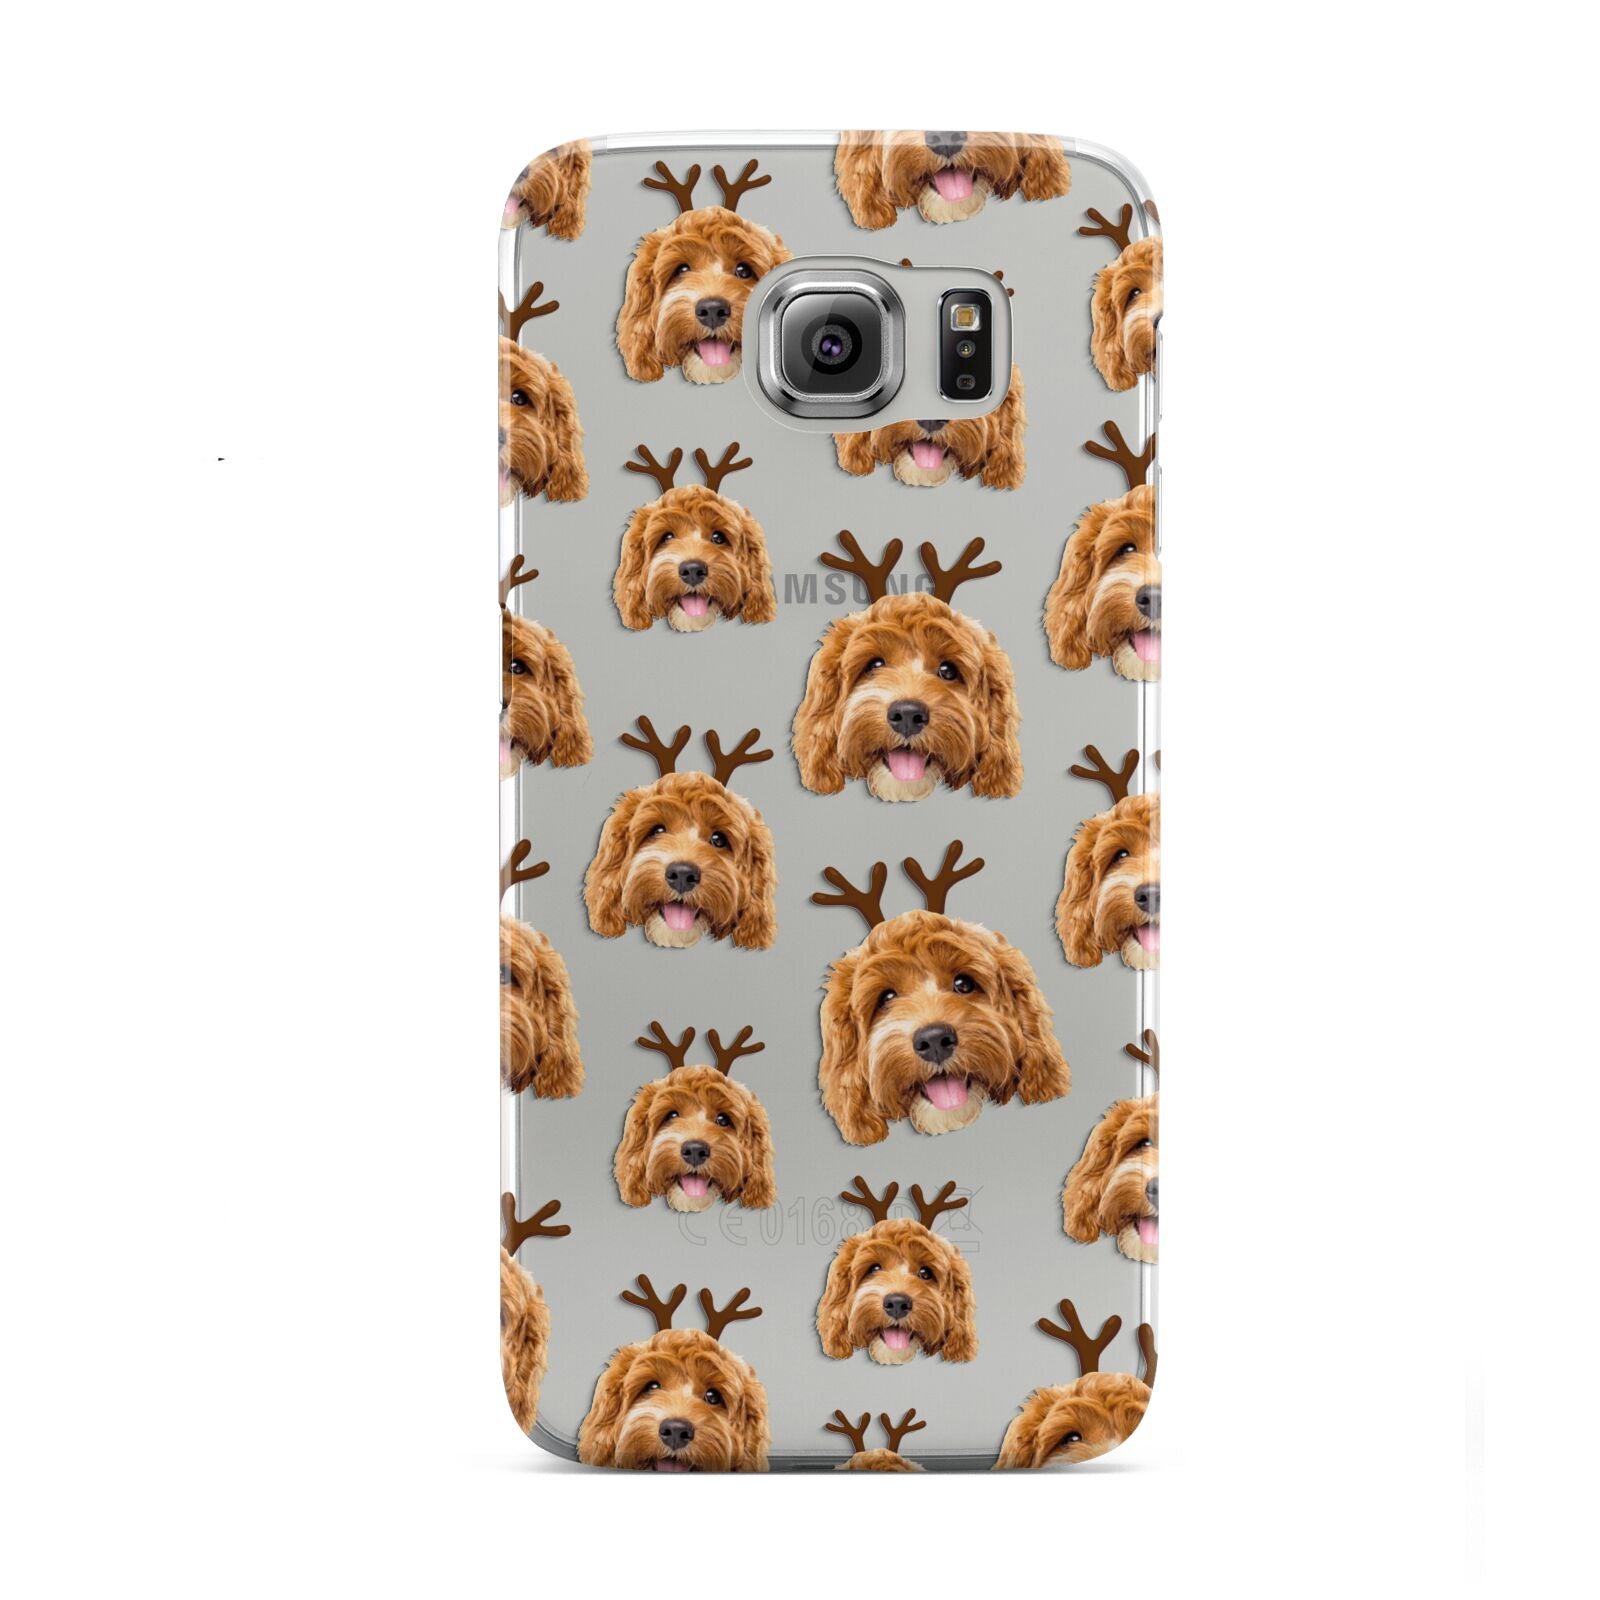 Personalised Christmas Dog Antler Samsung Galaxy S6 Case